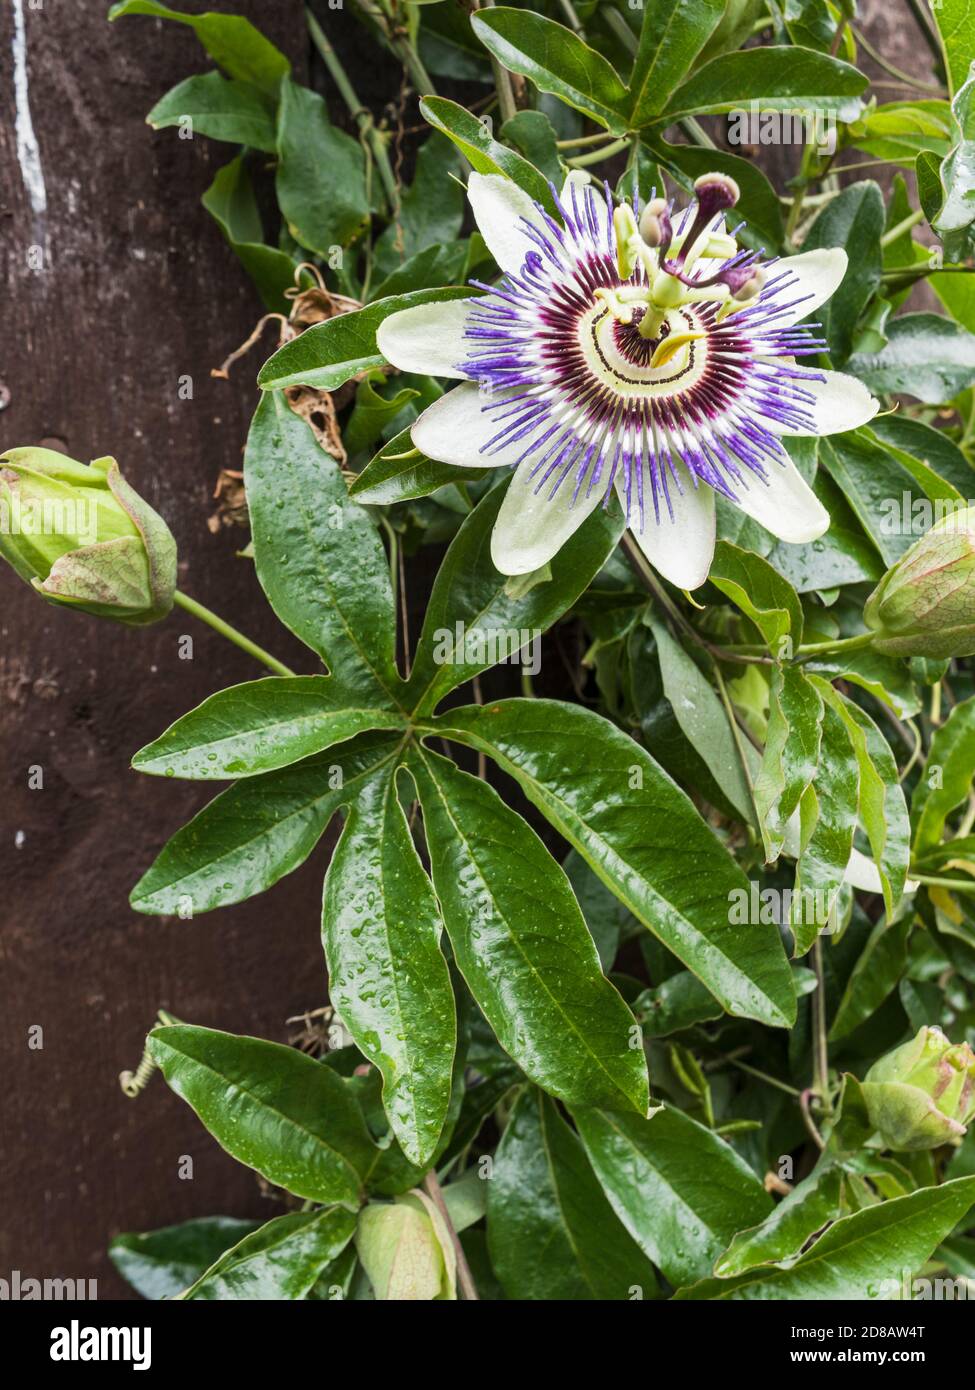 The Passiflora caerulea or Bluecrown passionflower is native to South America but seen here blooming in the UK Stock Photo